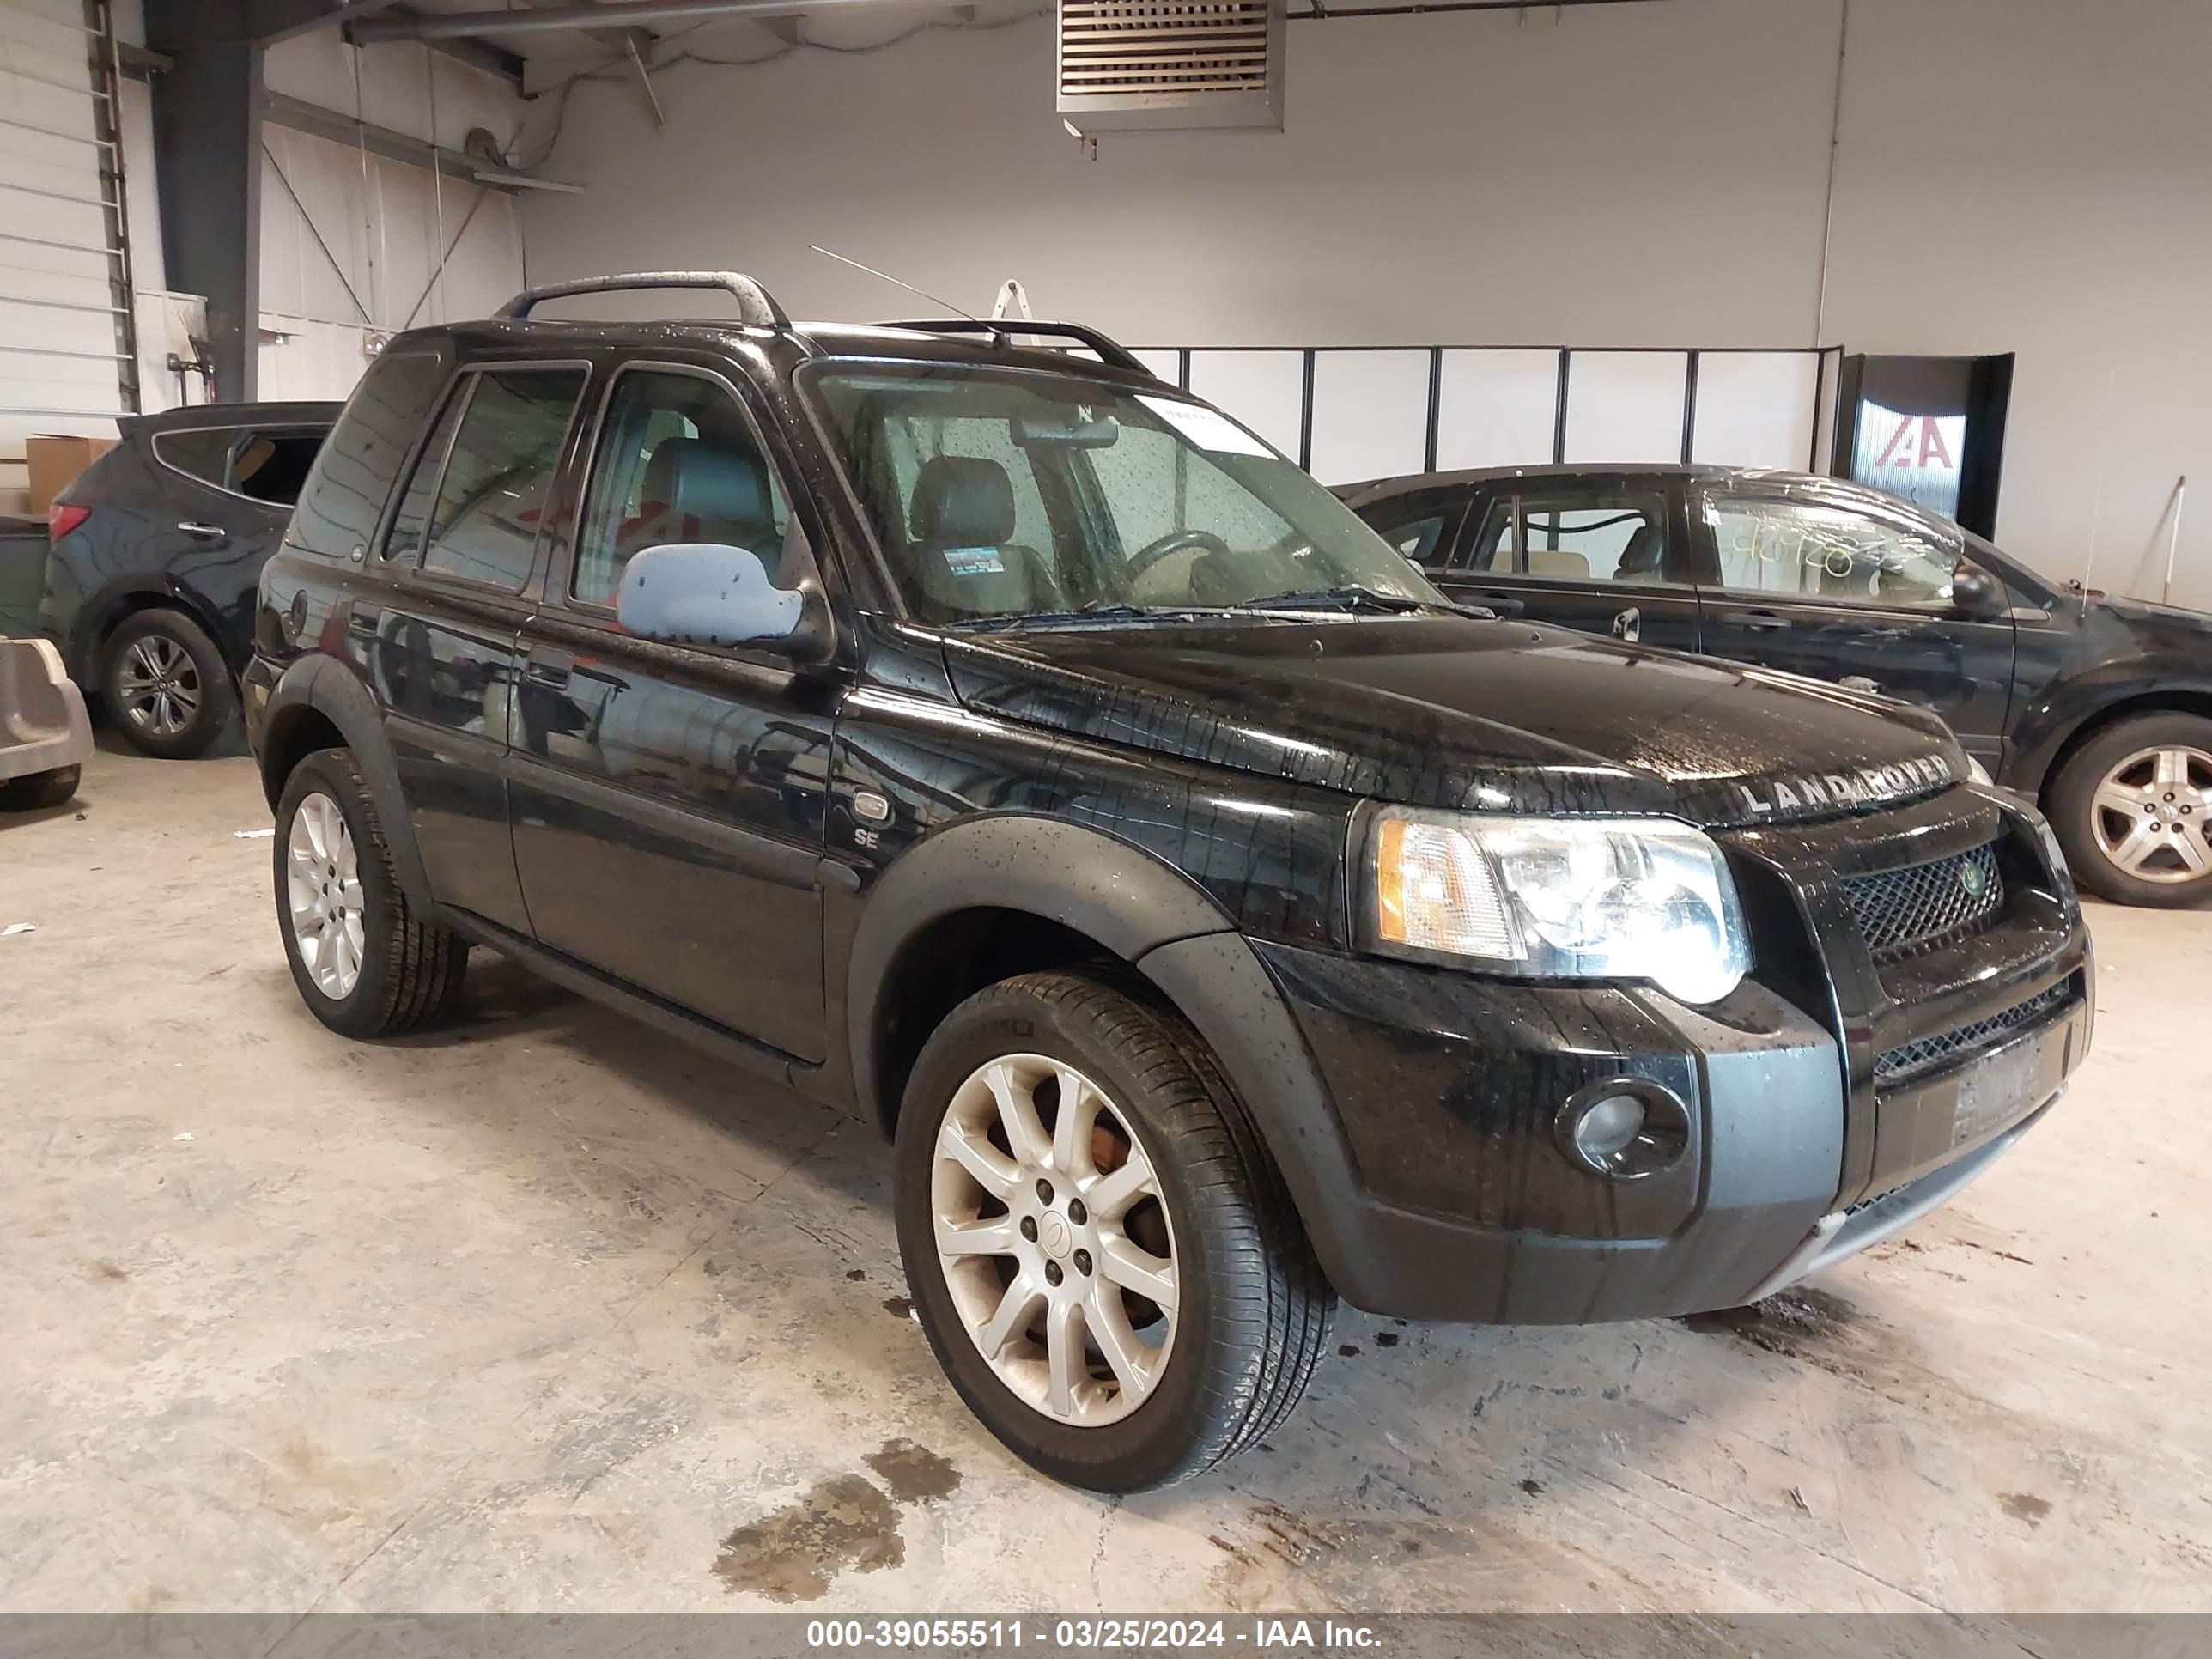 vin: SALNY22225A473255 SALNY22225A473255 2005 land rover freelander 2500 for Sale in 60118, 605 Healy Road, East Dundee, Illinois, USA